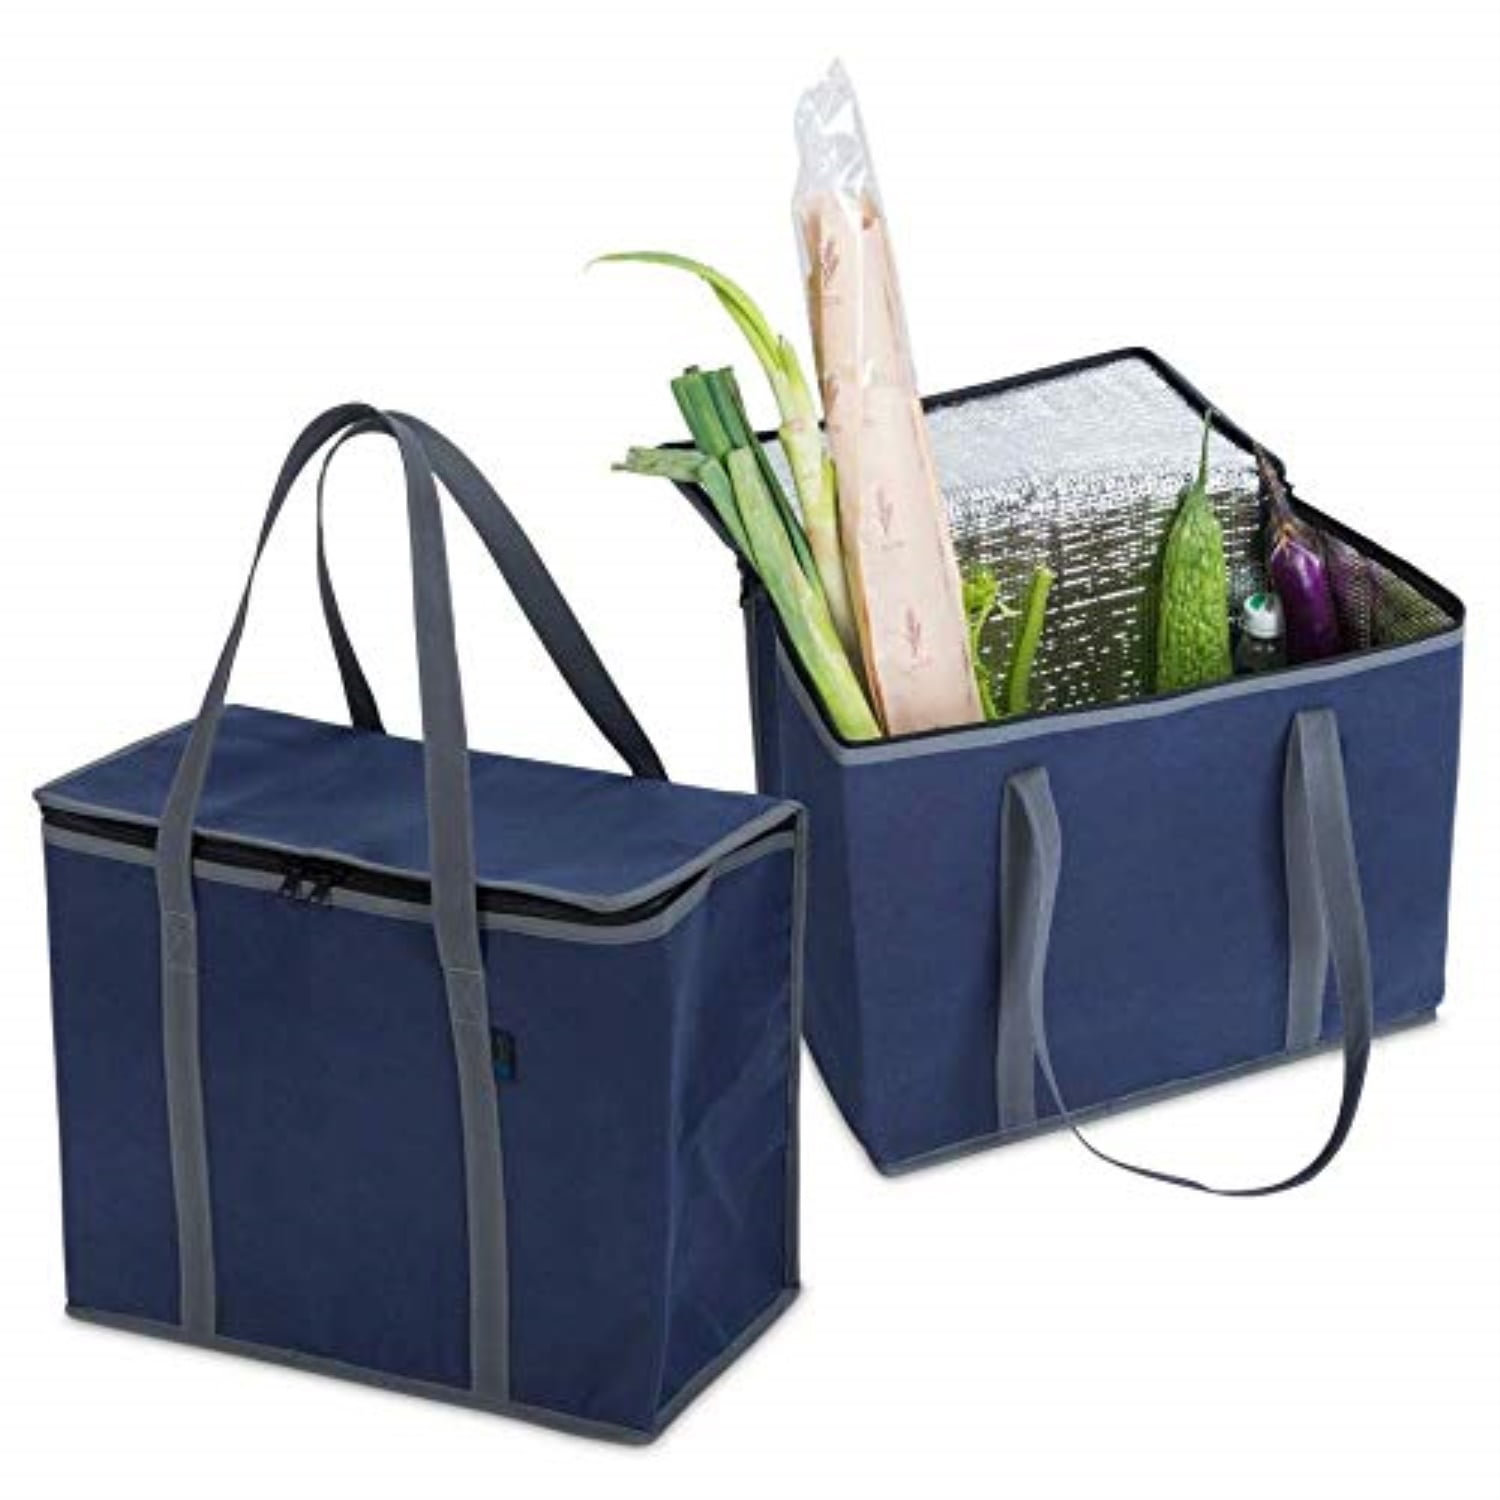 reusable grocery insulated shopping bags - 2 pack extra large size, collapsible & foldable heavy ...